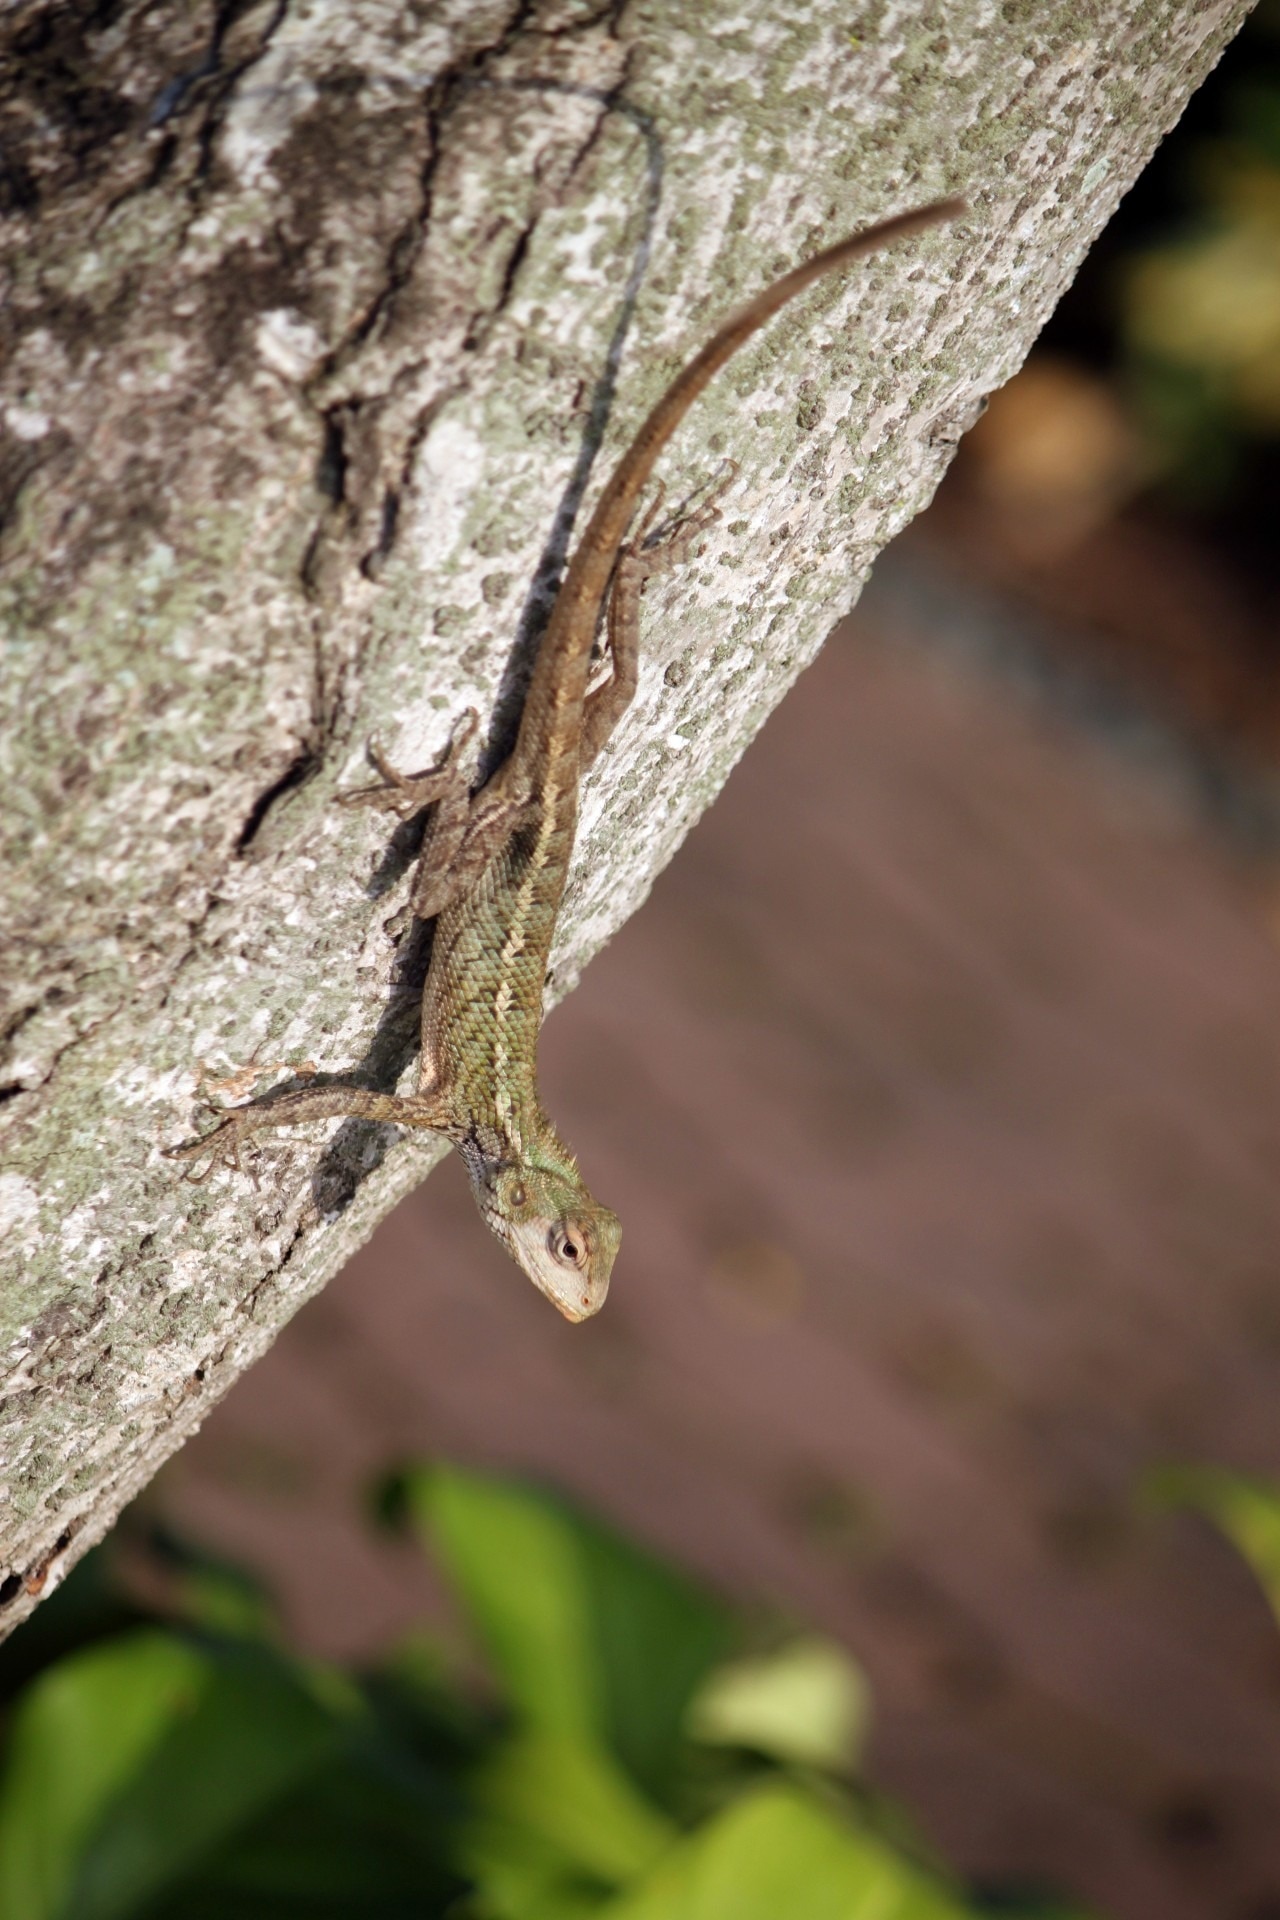 brown and green lizard